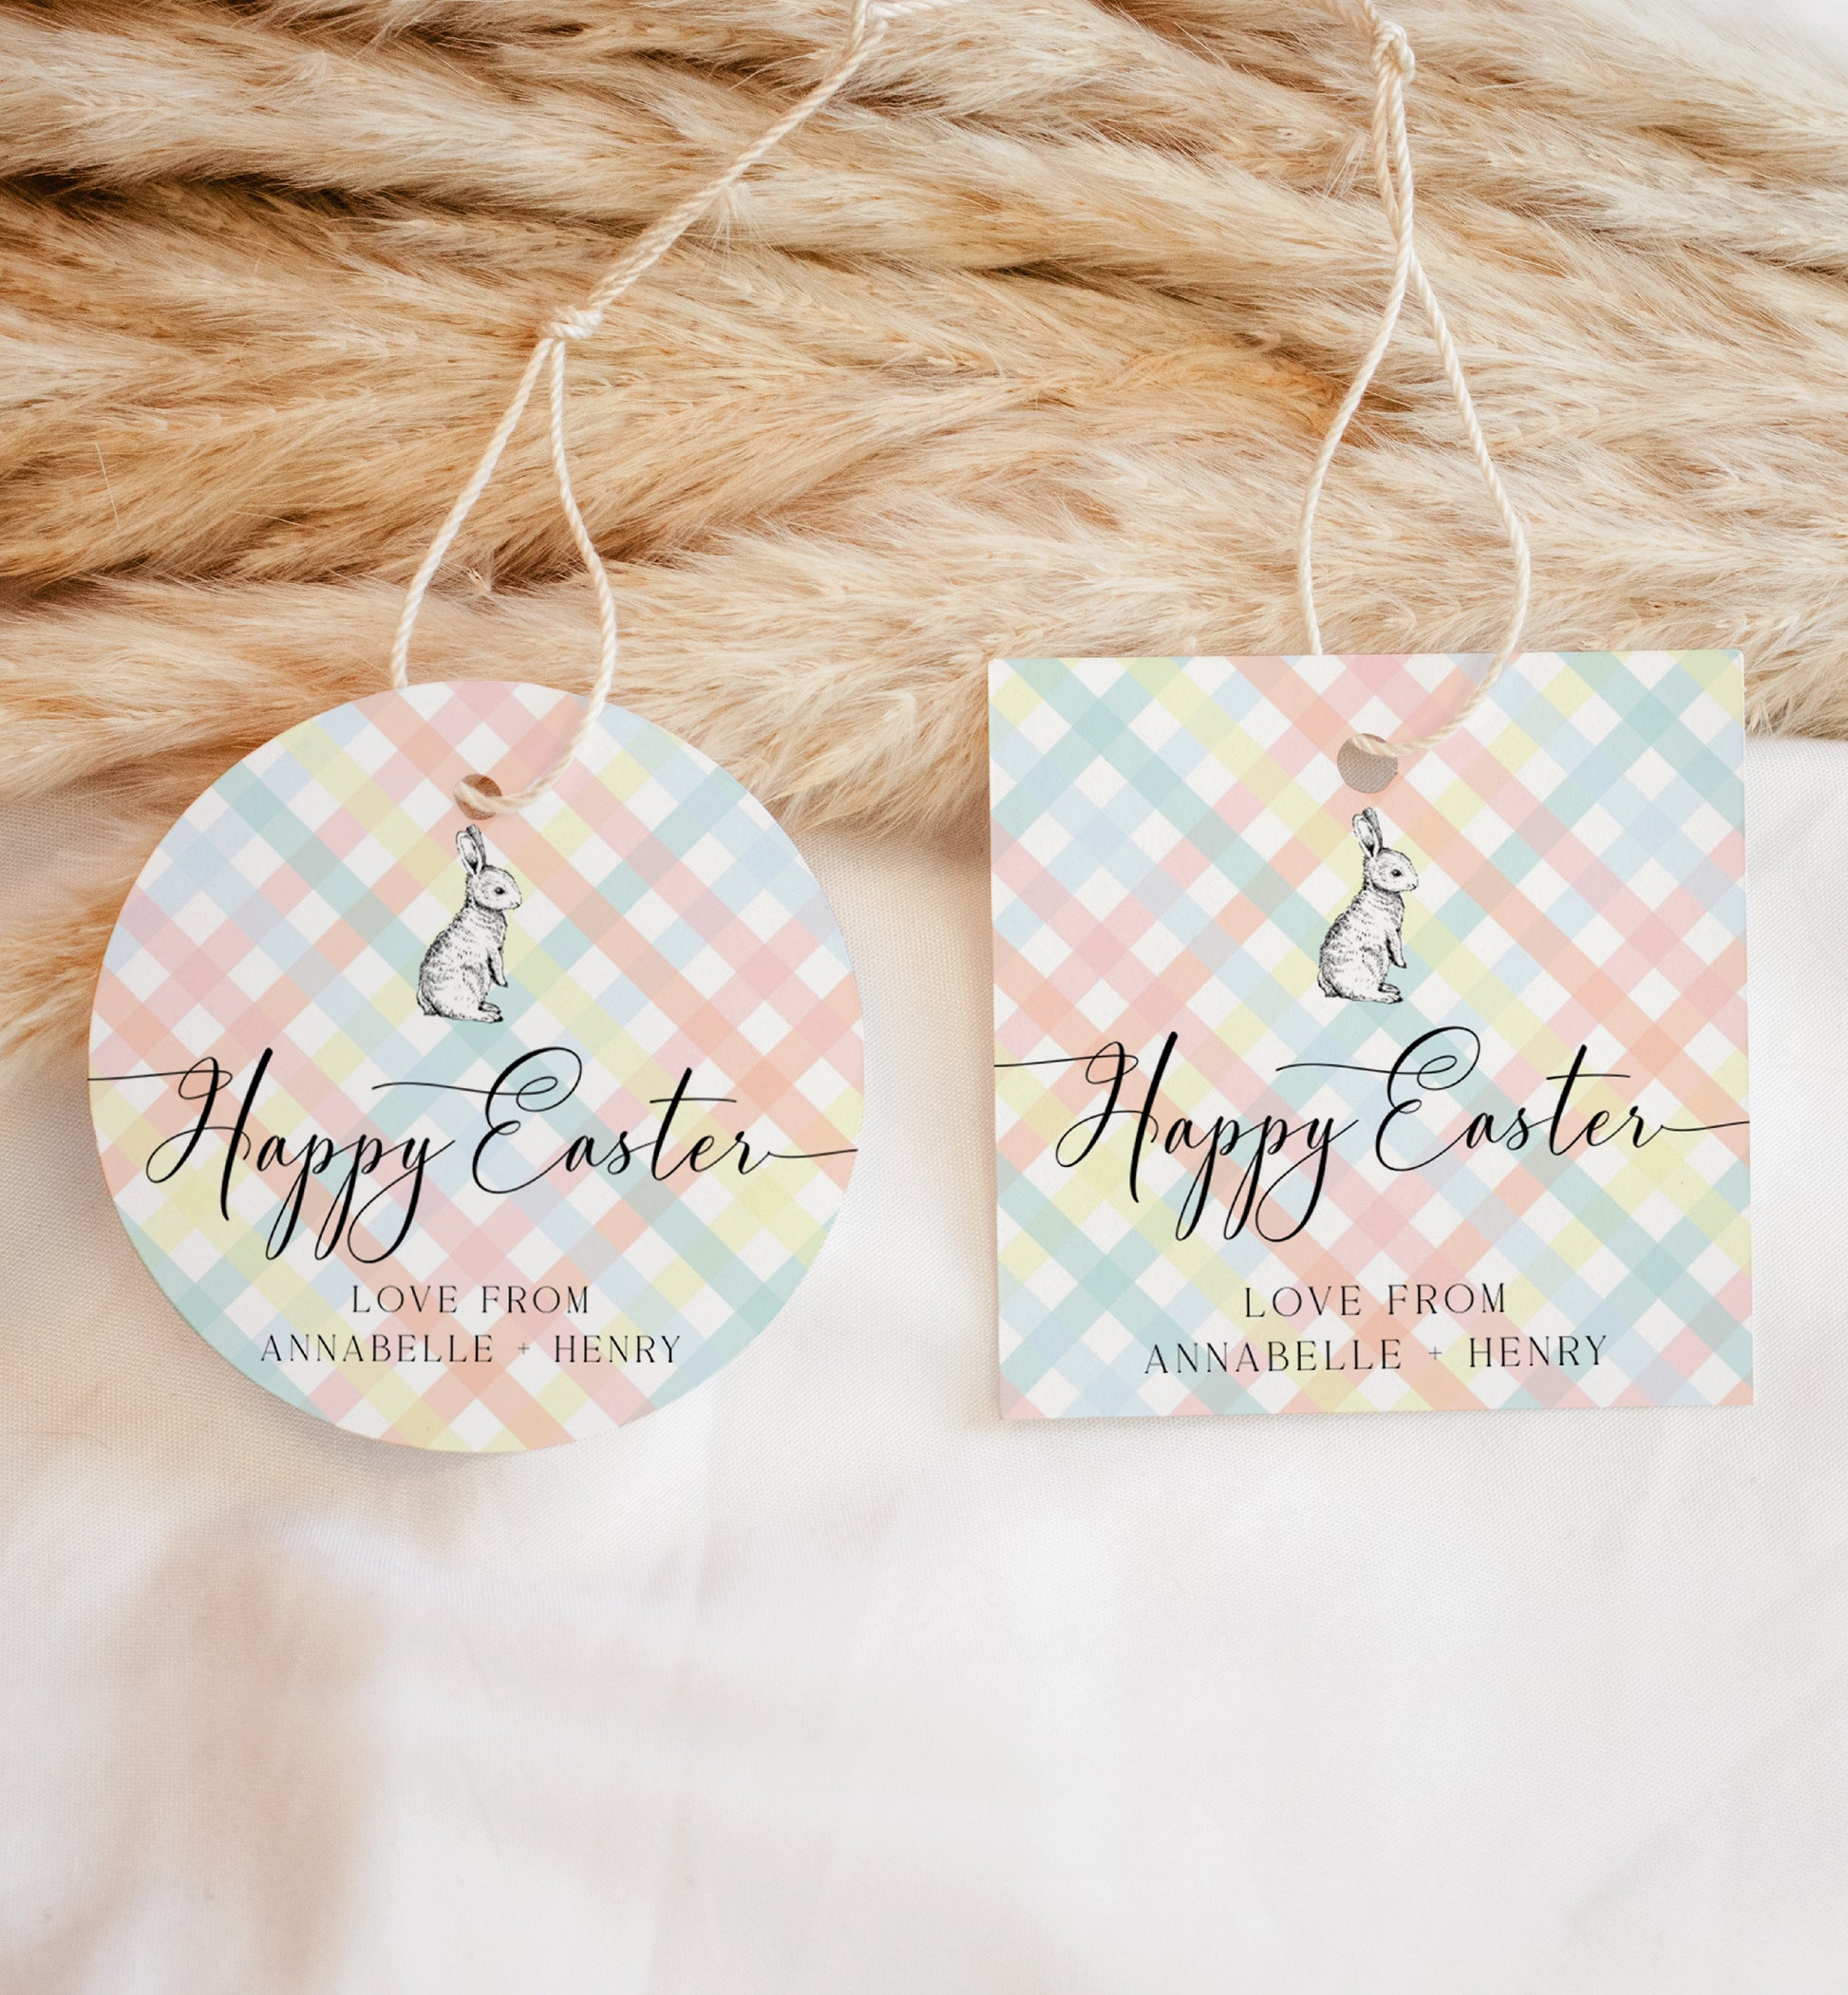 Printable Happy Easter Gift Tag Template, Easter Hunt Tag, Easter Basket, Easter Treat Tag, Easter Brunch, Easter Thank You, Multi Gingham